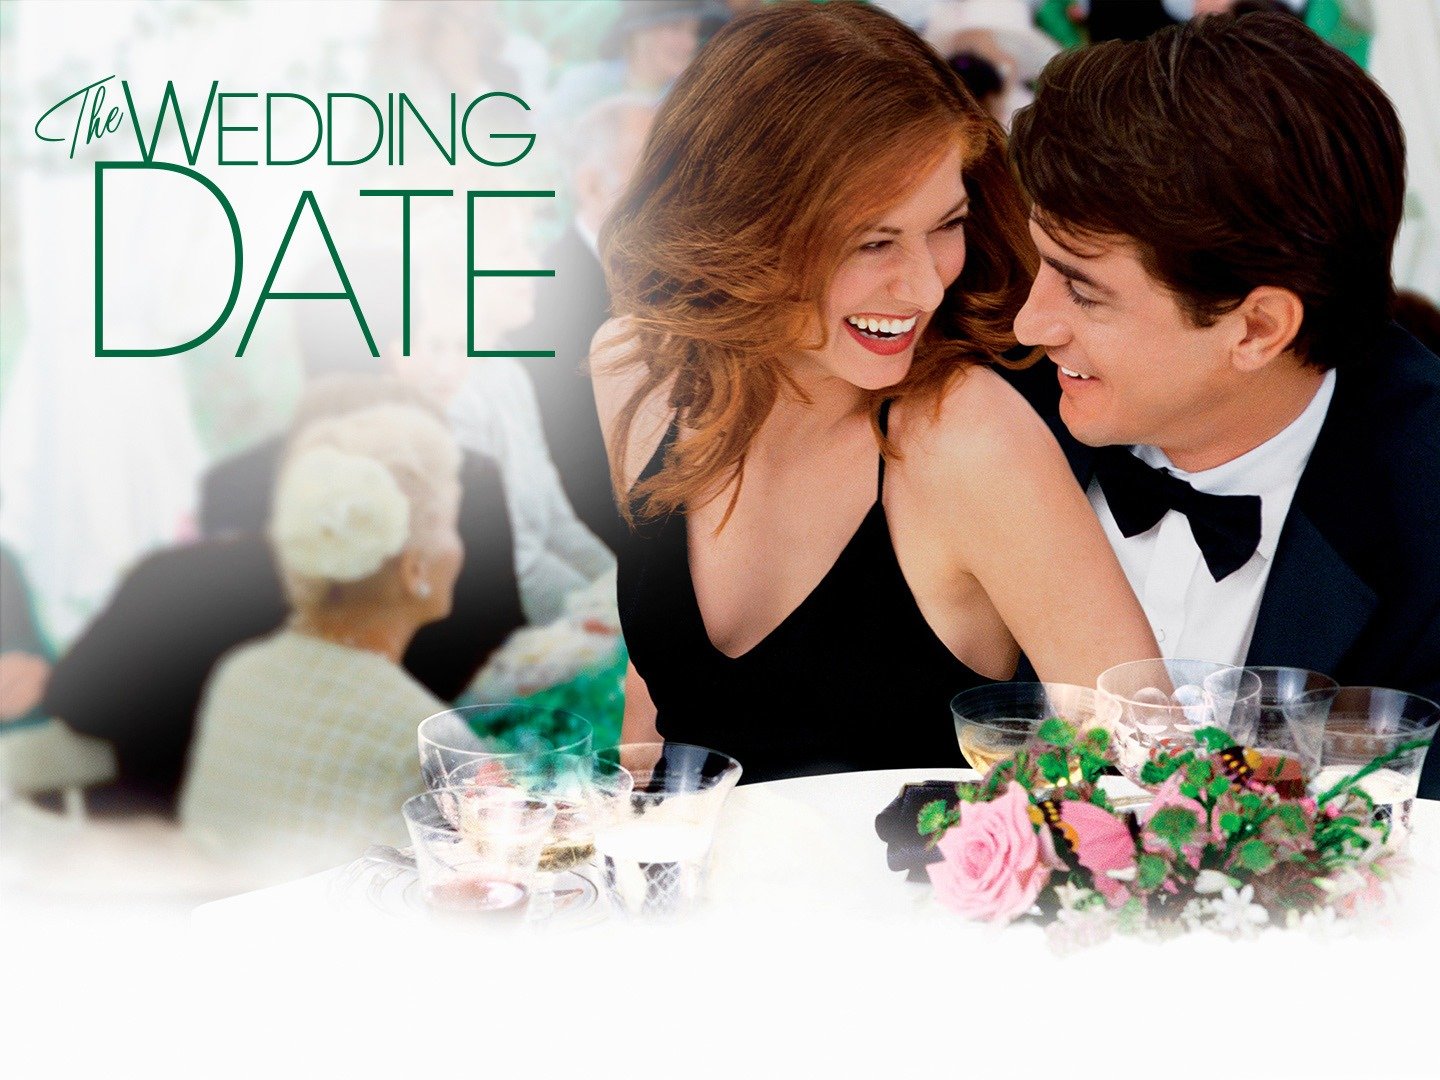 The weding date online